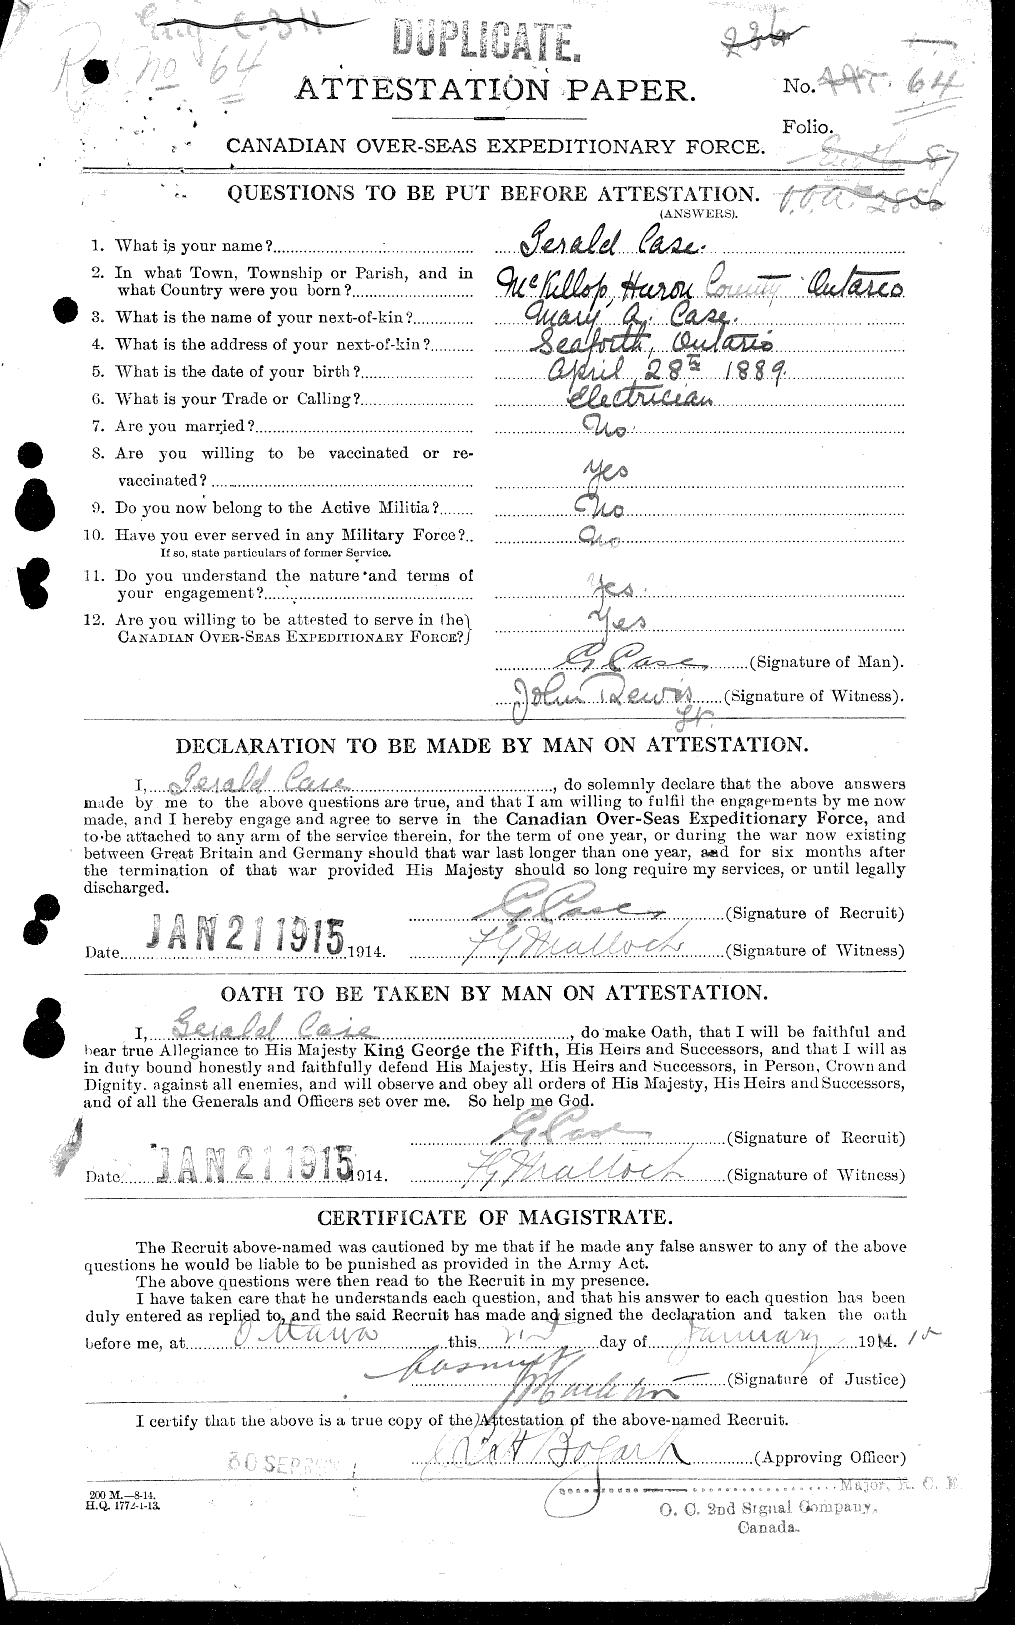 Personnel Records of the First World War - CEF 012707a